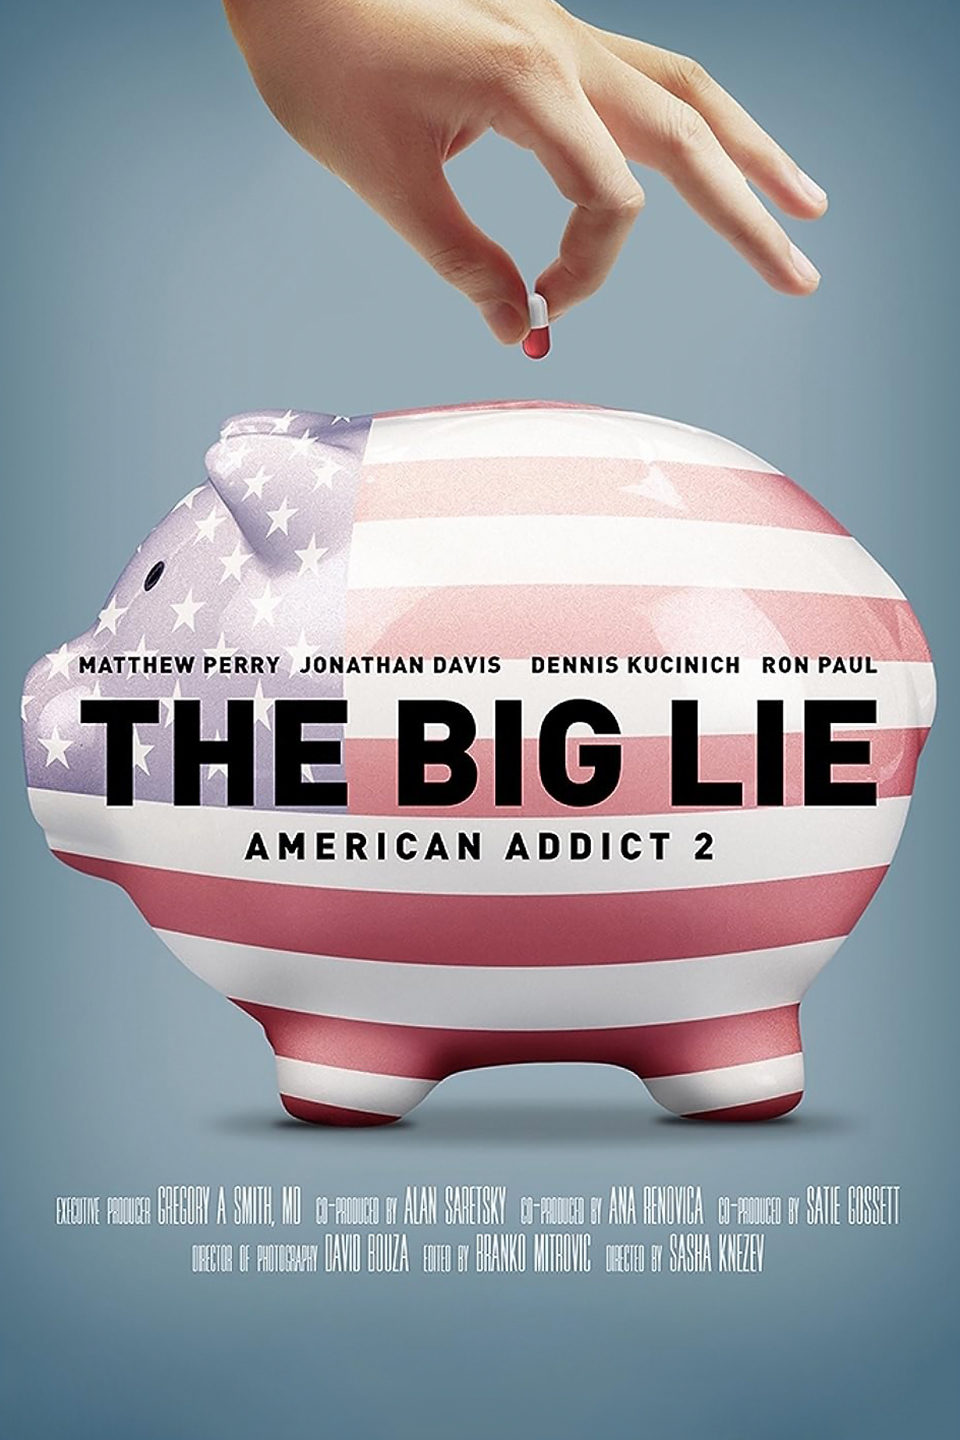 The Big Lie American Addict 2 picture pic